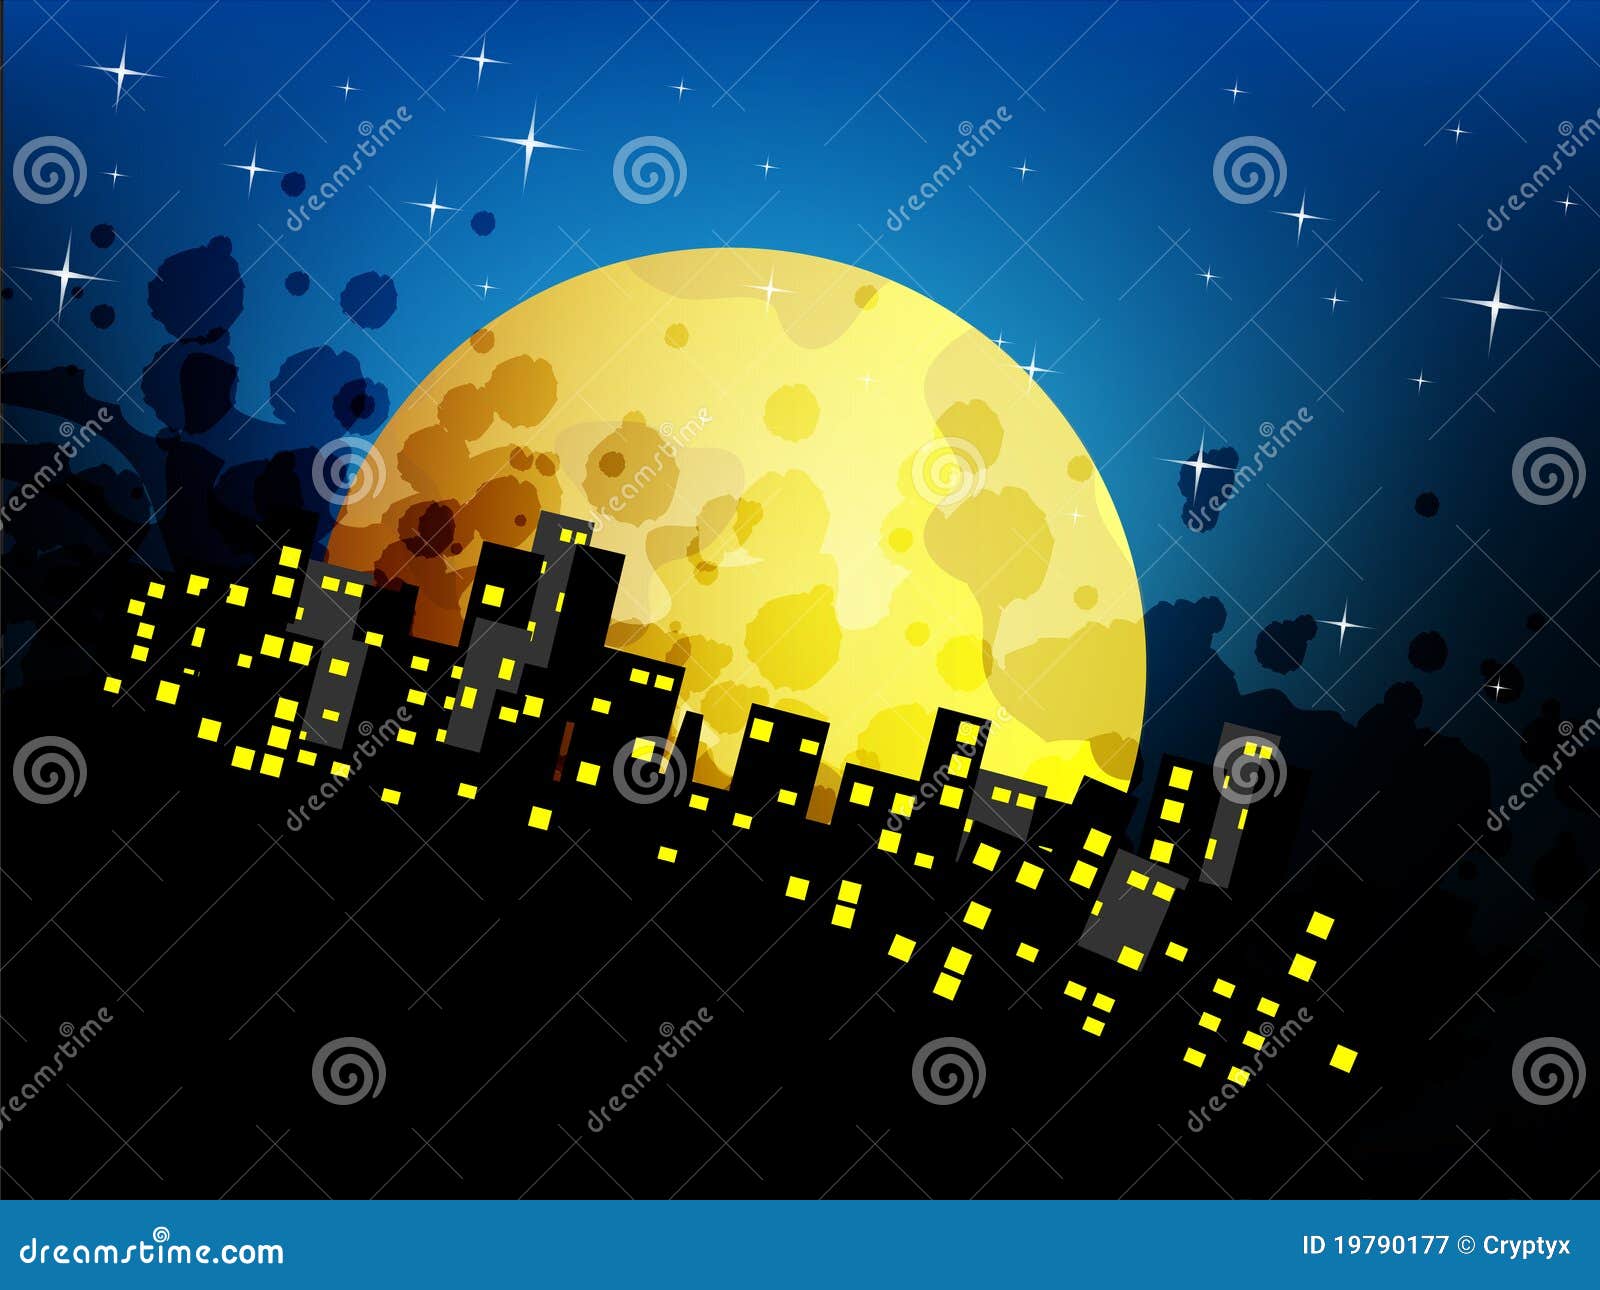 Abstract Night City Background Stock Vector - Illustration of